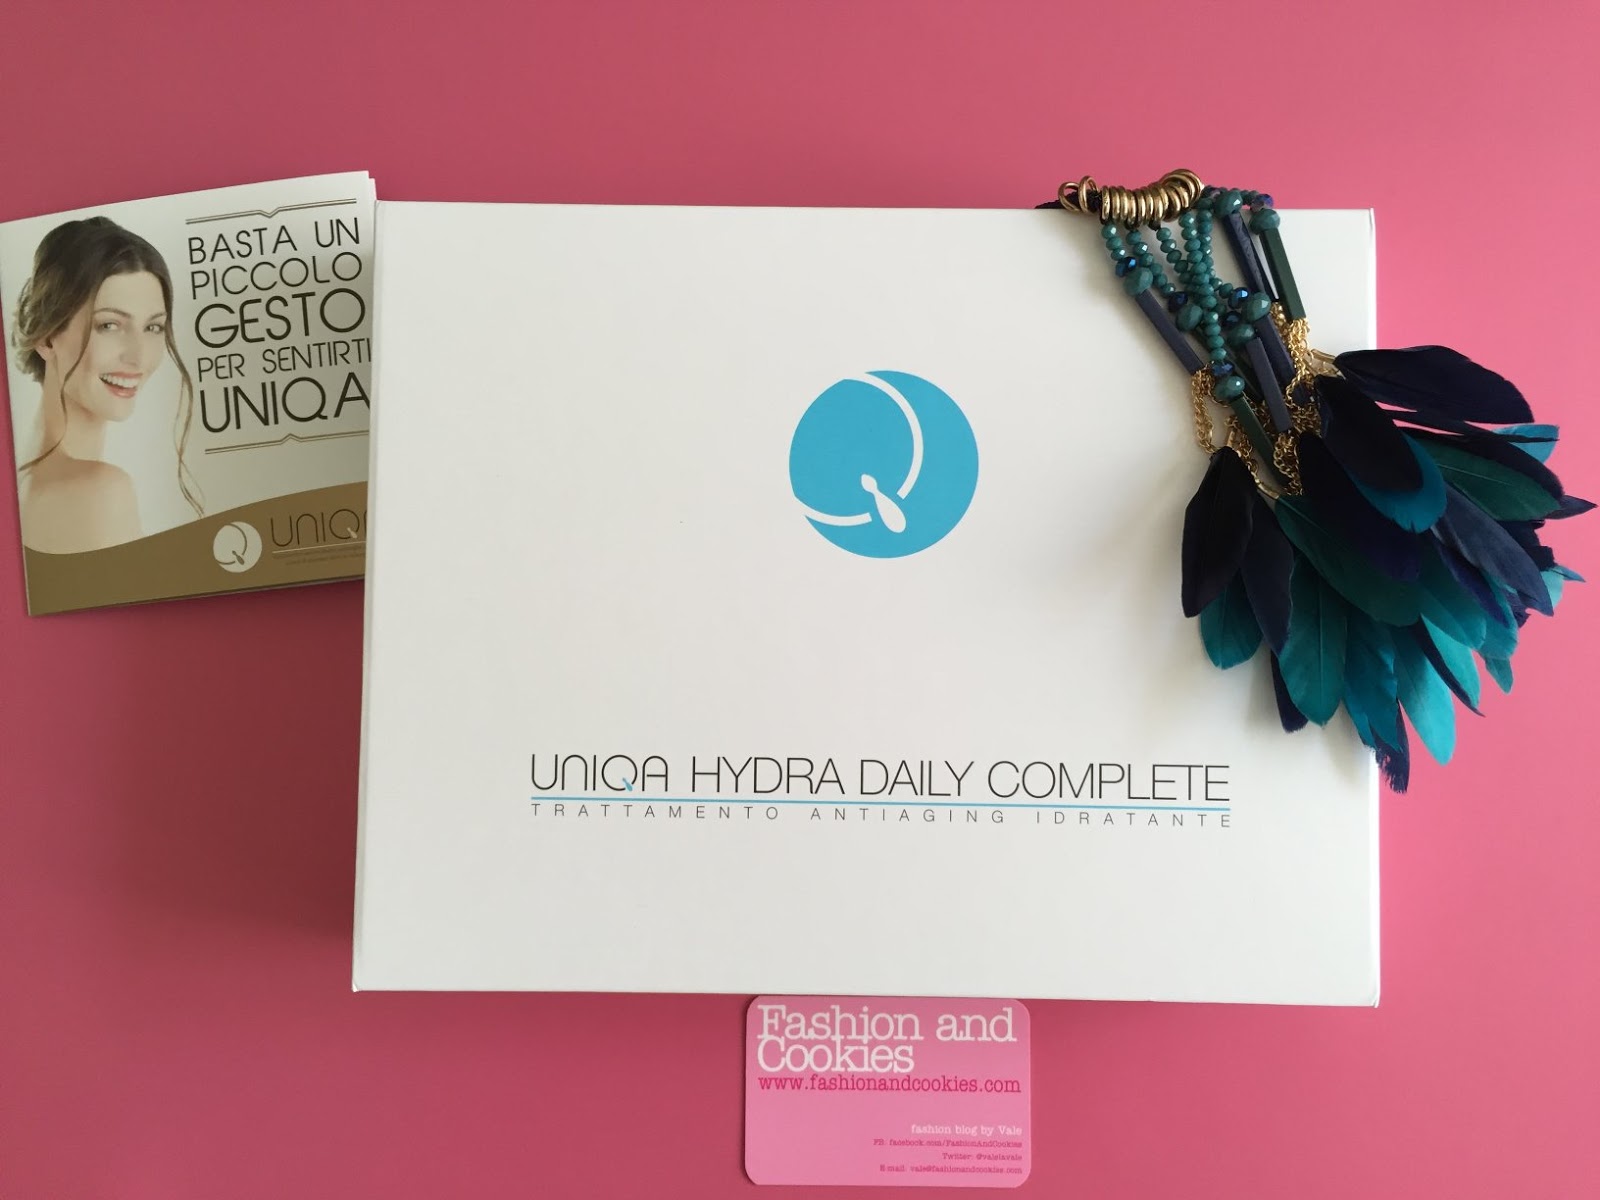 Uniqa by Pea Cosmetics Uniqa Hydra Daily Complete, skincare treatment review on Fashion and Cookies beauty blog, beauty blogger